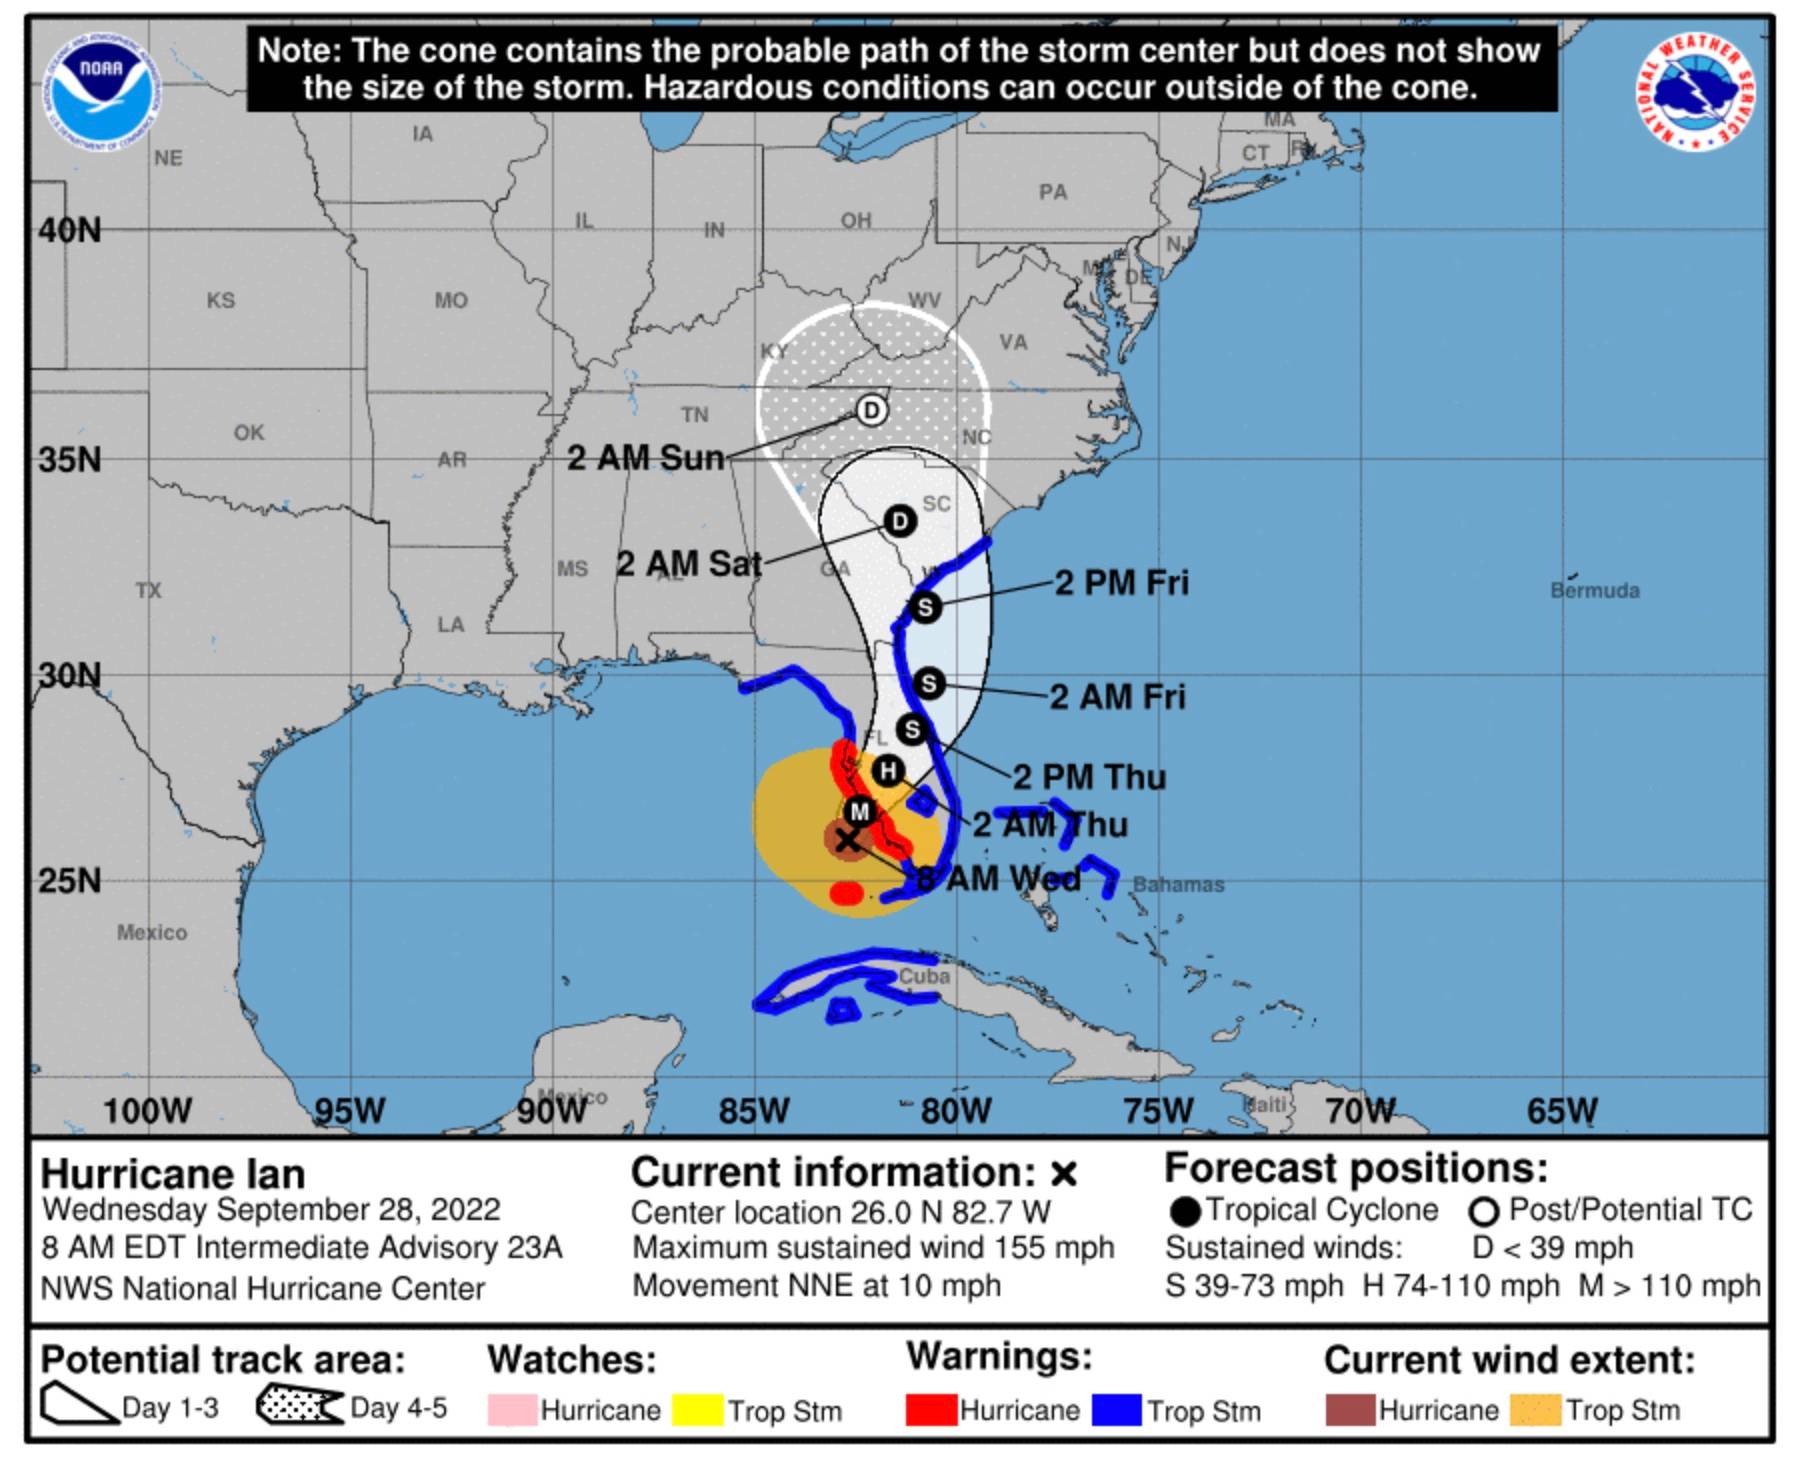 Walt Disney World is directly in the path of Hurricane Ian as the system intensifies to 155mph winds with the forecast tracking across Orlando